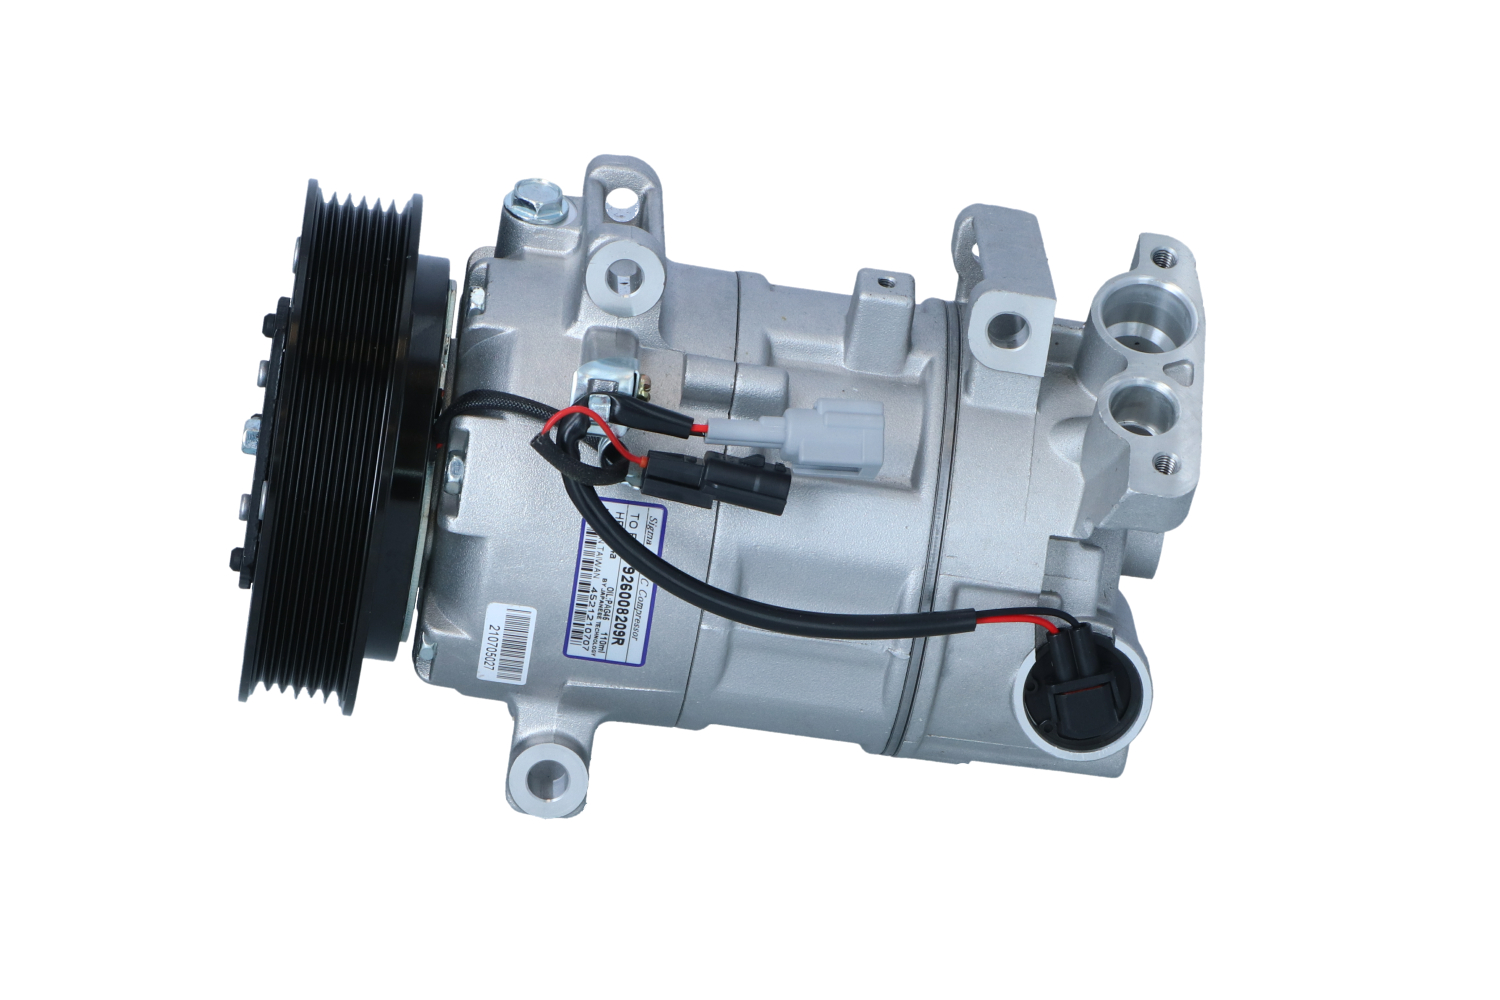 NRF 320058 Air conditioning compressor 6SBL14C, 12V, PAG 46 YF, R 1234yf, R 134a, with magnetic clutch, with seal ring